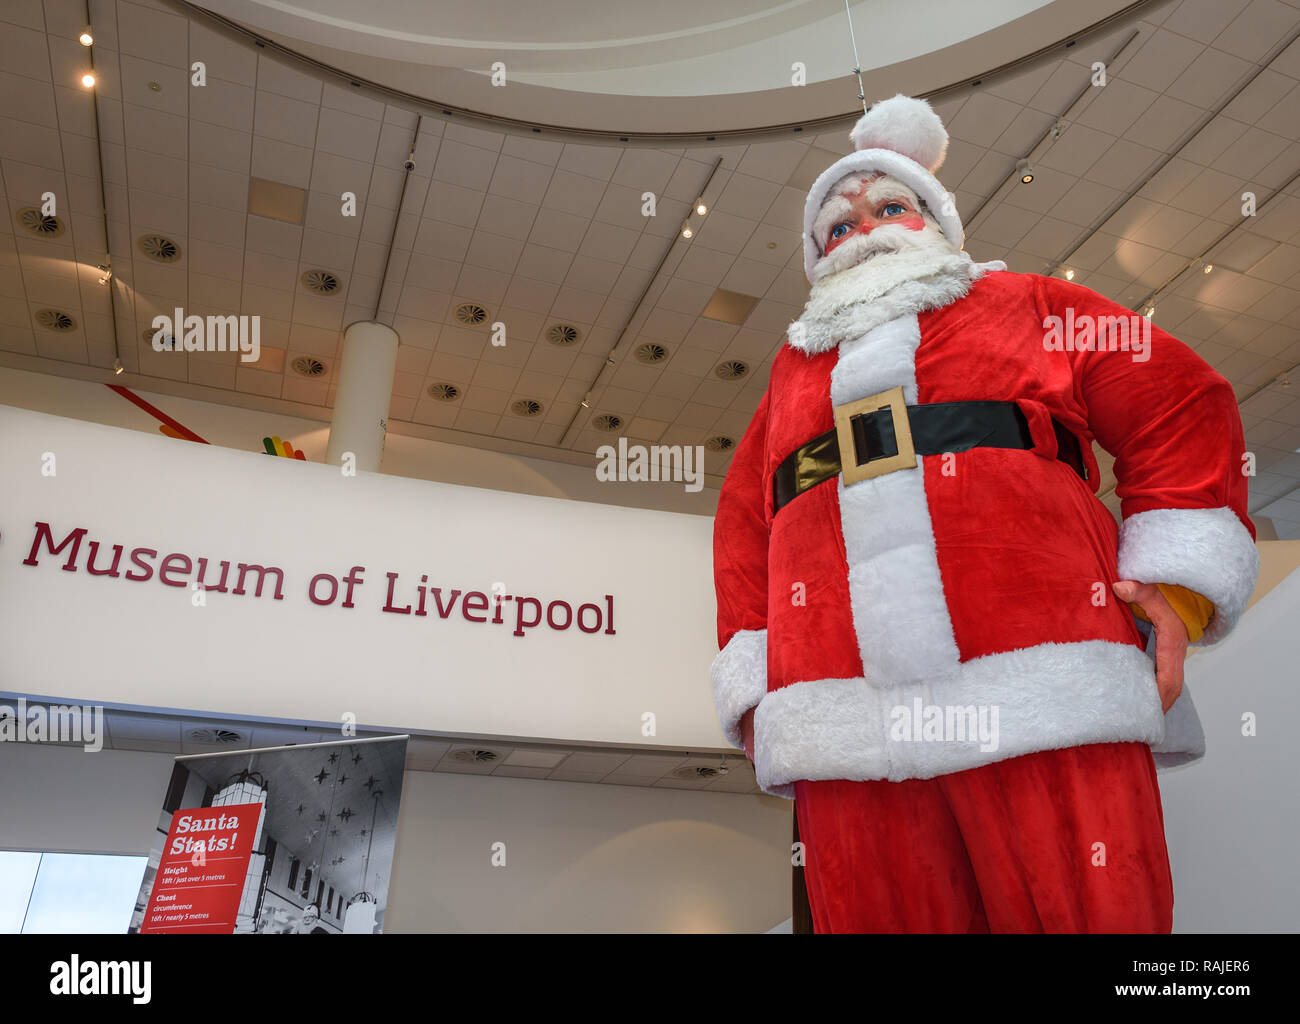 A giant Santa that used to be displayed in Blacklers department store (1957-1988) in Liverpool. It is now displayed in the museum of Liverpool, Engla Stock Photo